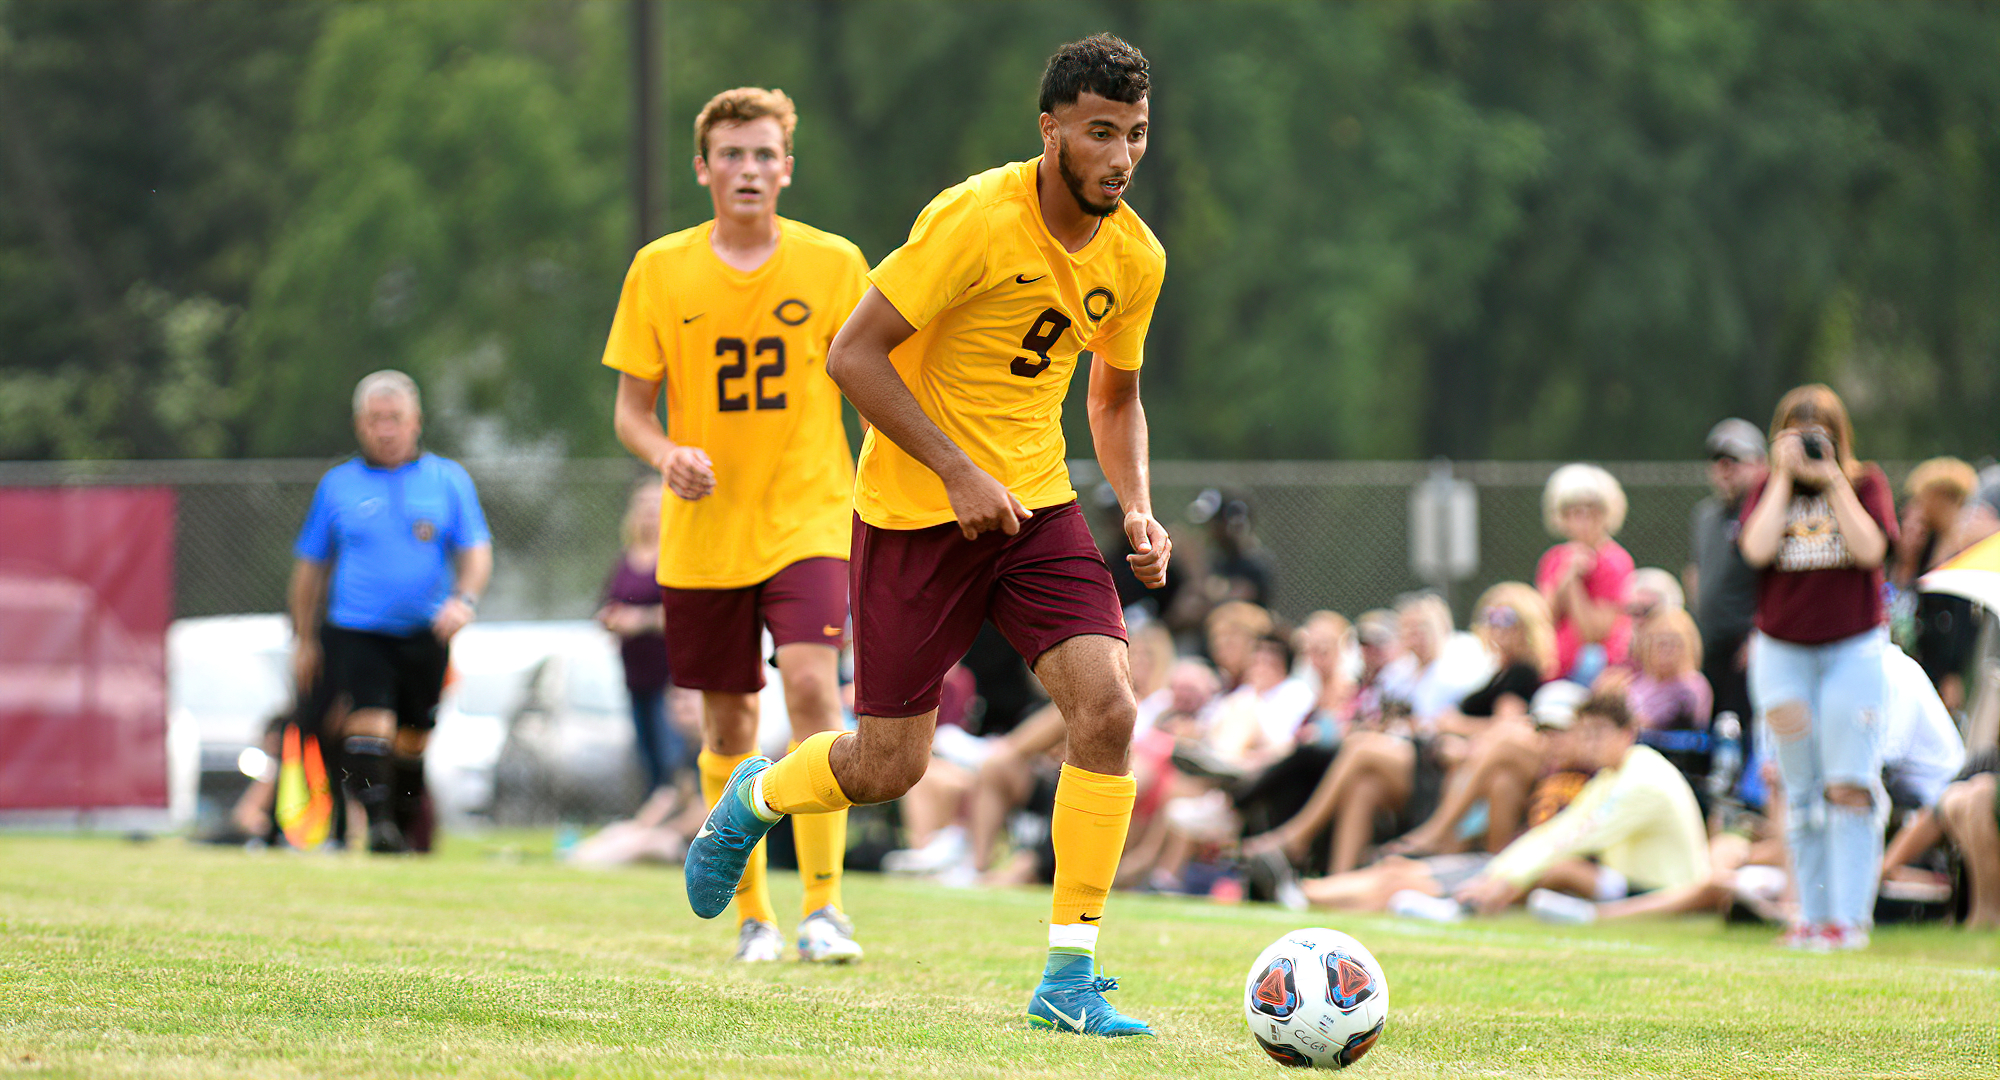 Sophomore Albara Mutleq scored Concordia's lone goal in their game against regionally-ranked Gustavus. The tally was his second of the season.